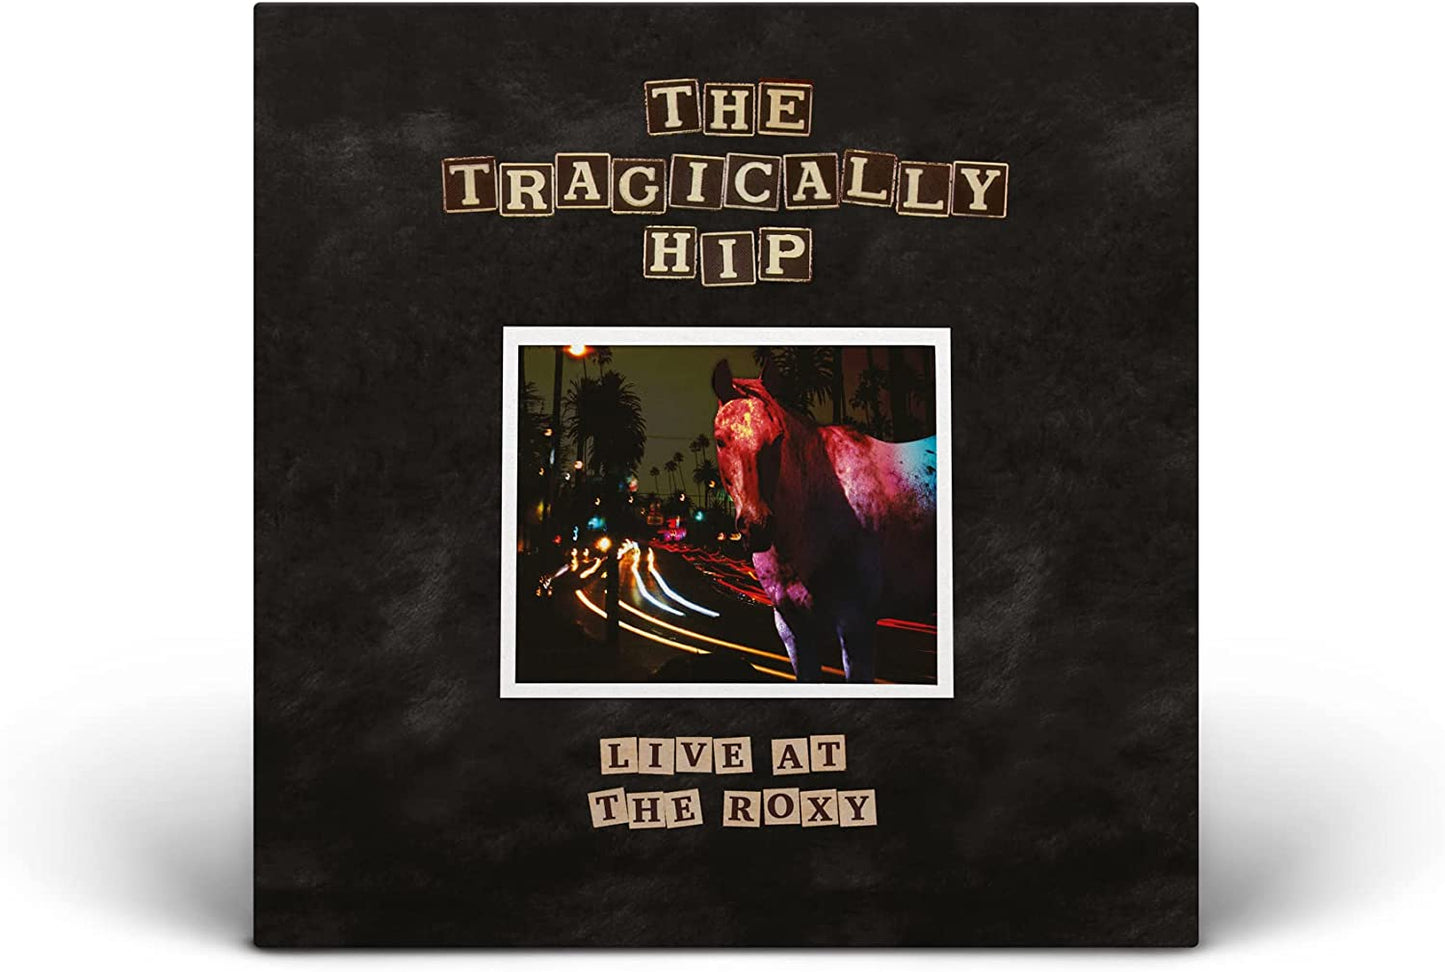 2LP - The Tragically Hip - Live At The Roxy